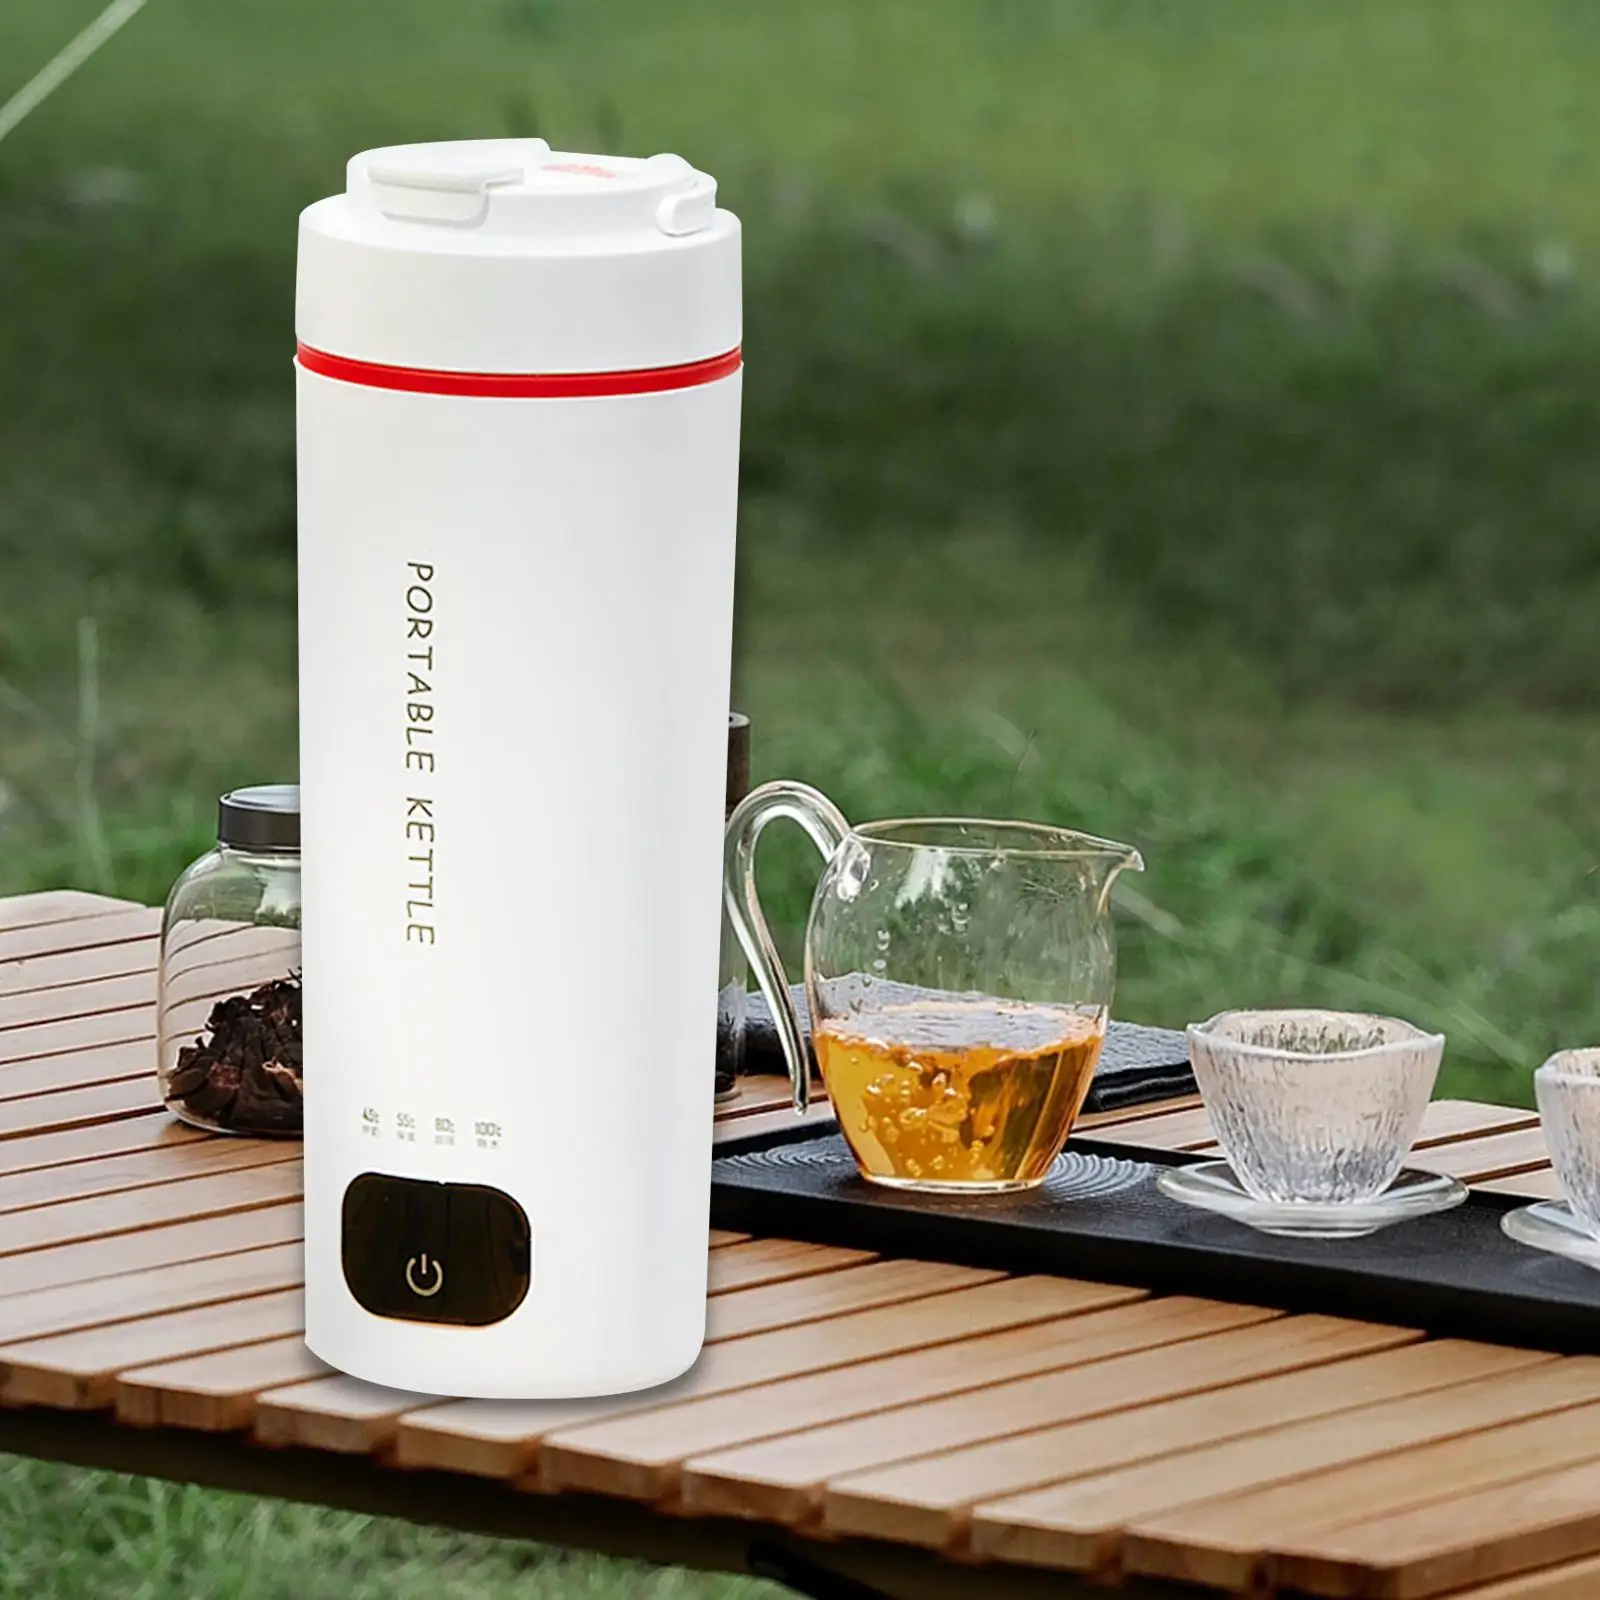 Portable Electric Hot Water Kettle Fast Boiling Water Insulated Tea Coffee Kettle Water Boiler for Honey Water Milk Camping